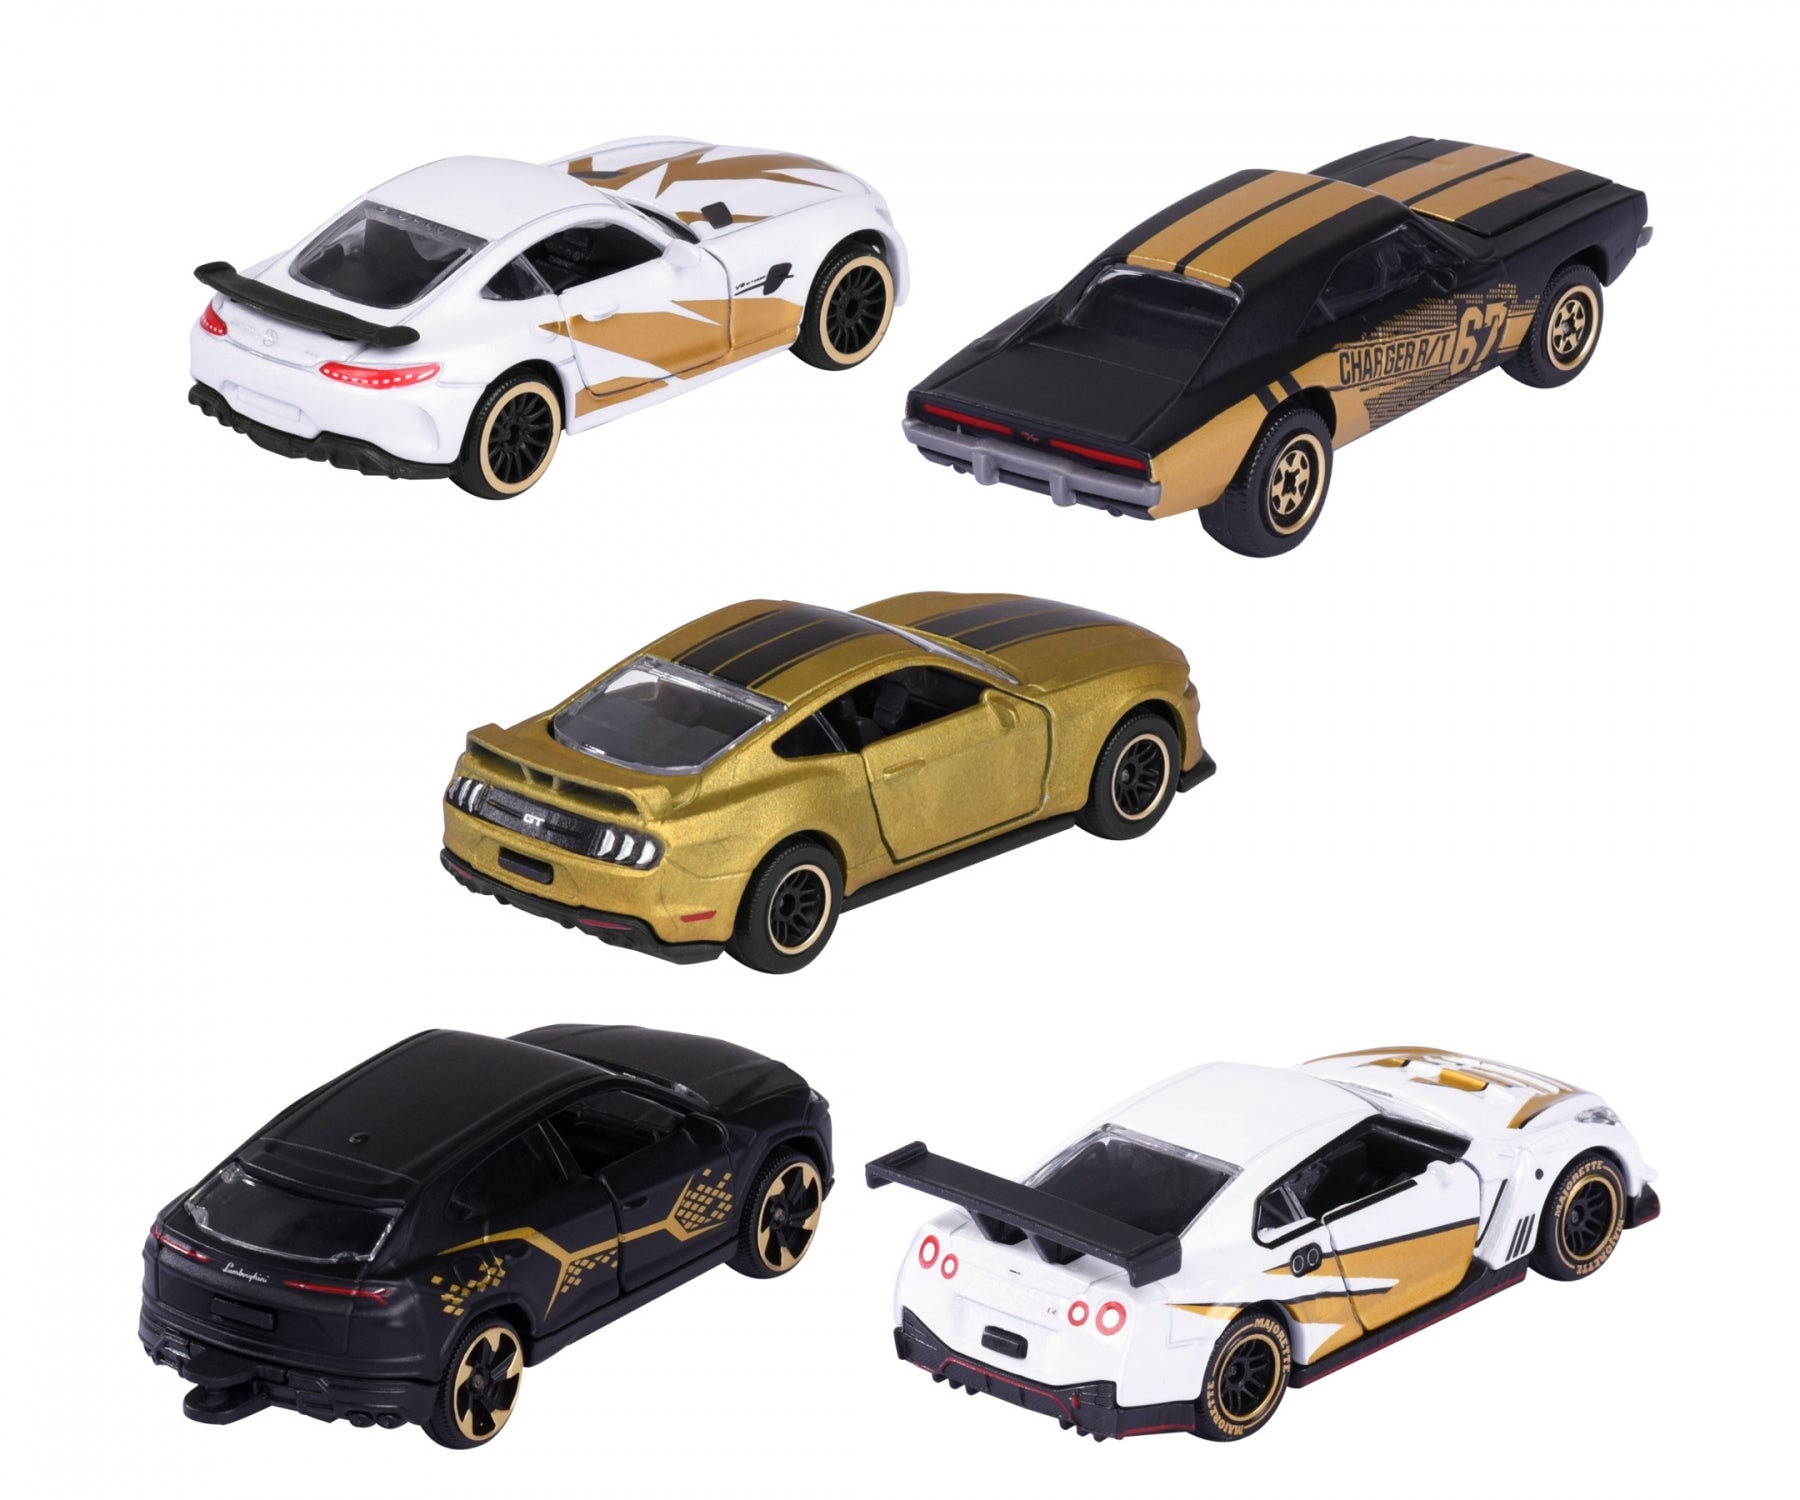 Majorette Limited Edition 9 Series 5 Car Gift Set For Kids Ages 3+